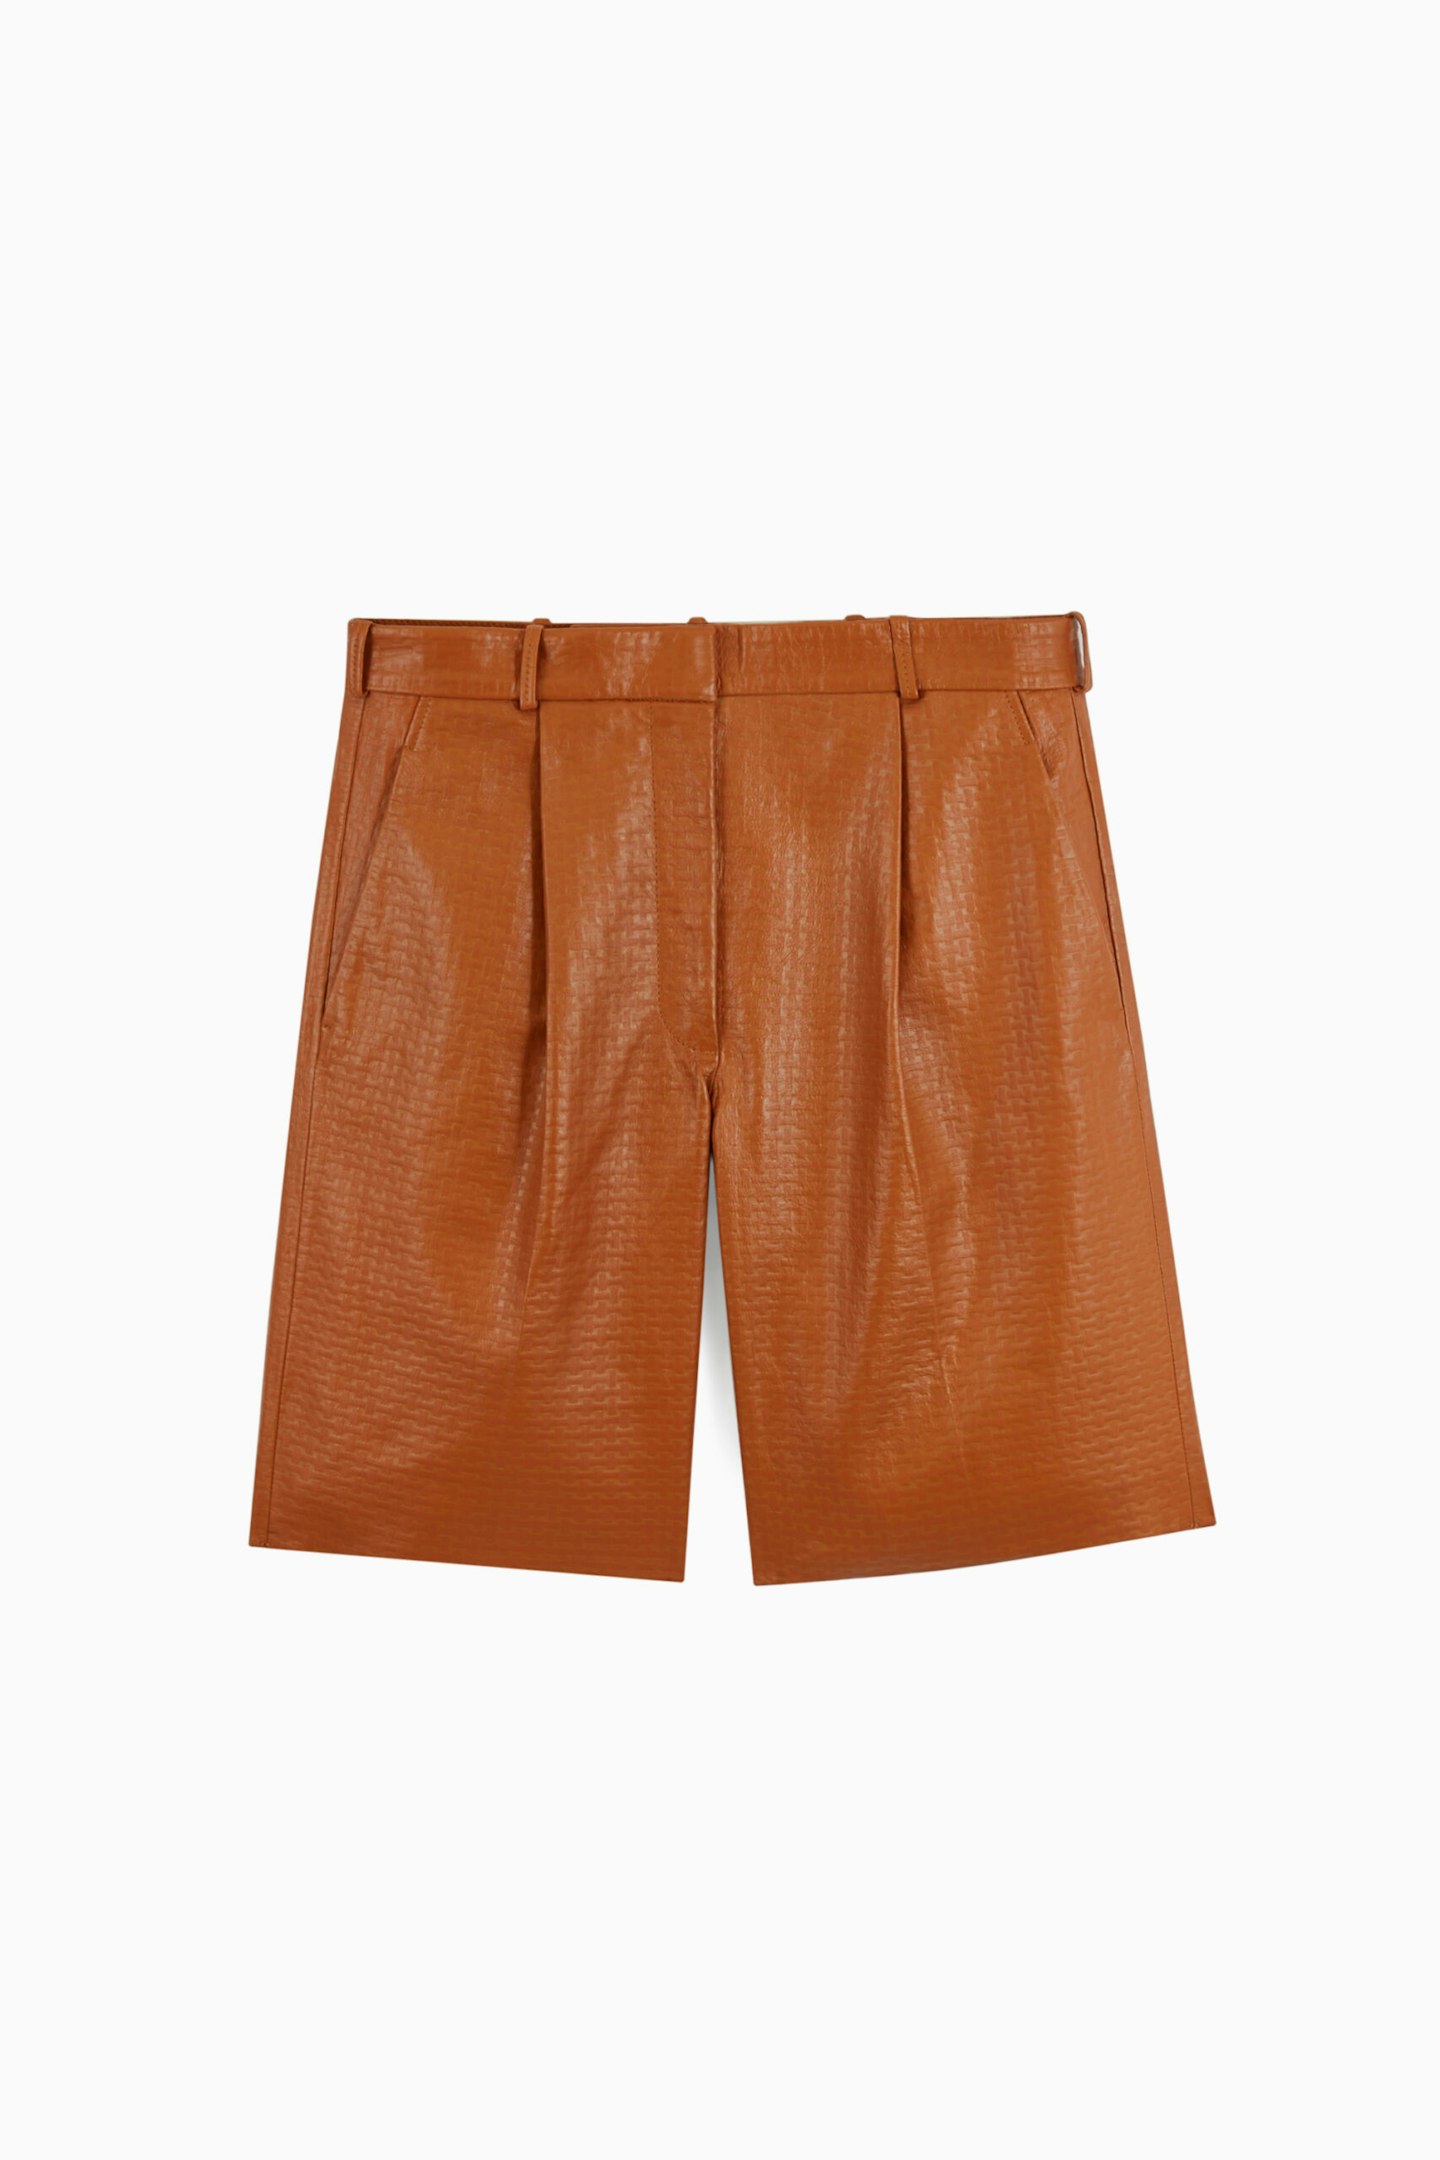 cos atelier embossed leather shorts